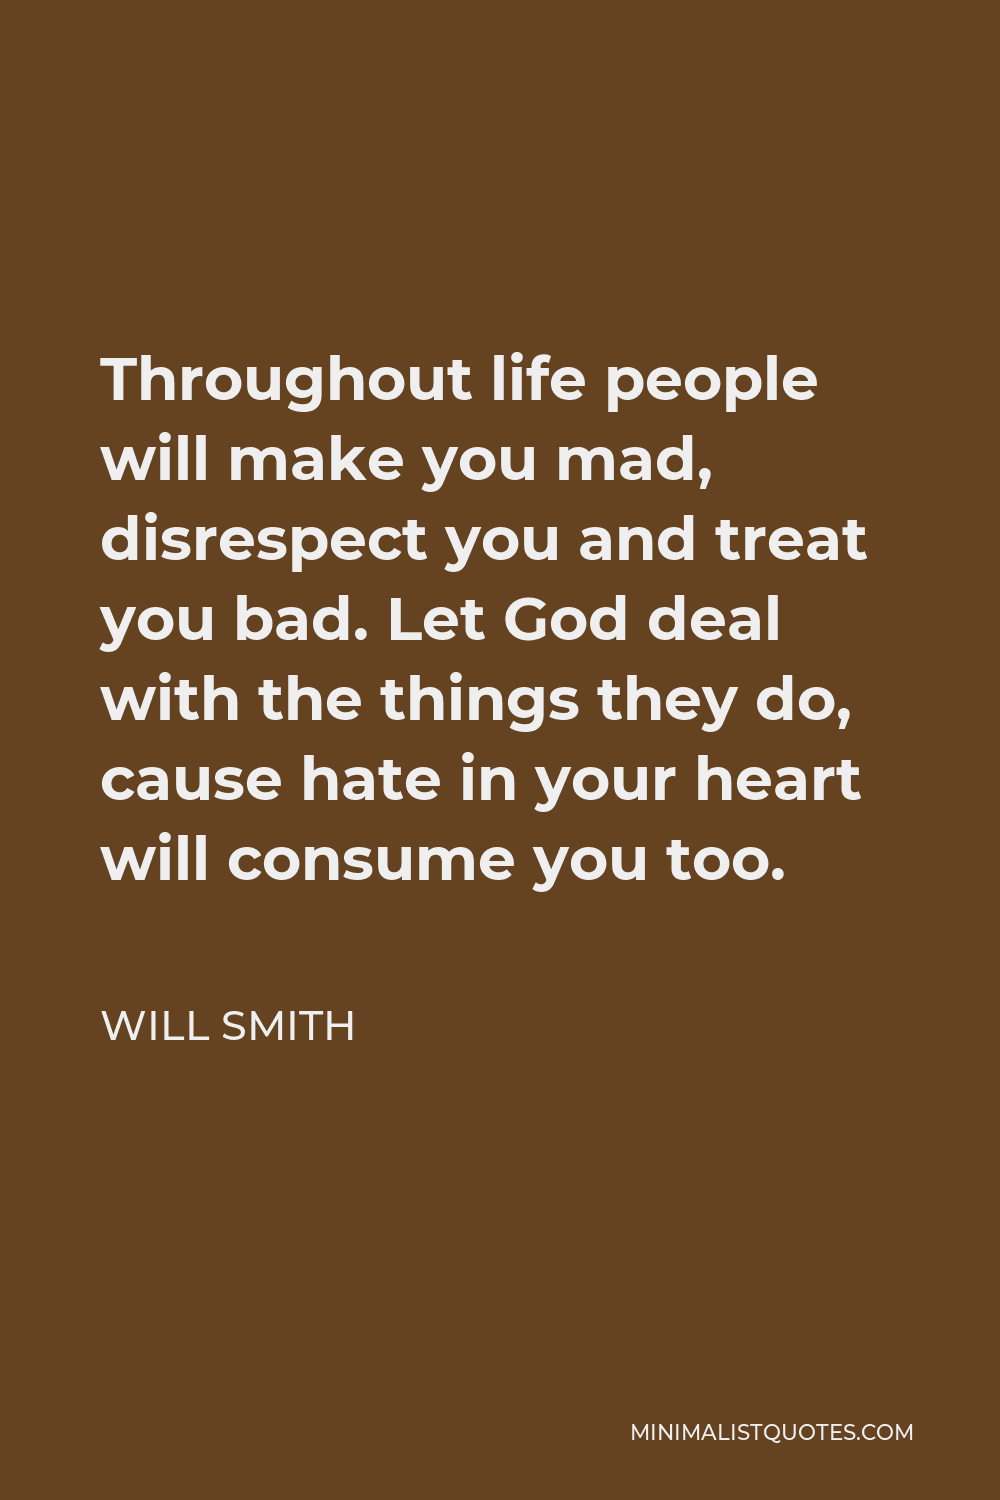 Will Smith Quote - Throughout life people will make you mad, disrespect you and treat you bad. Let God deal with the things they do, cause hate in your heart will consume you too.